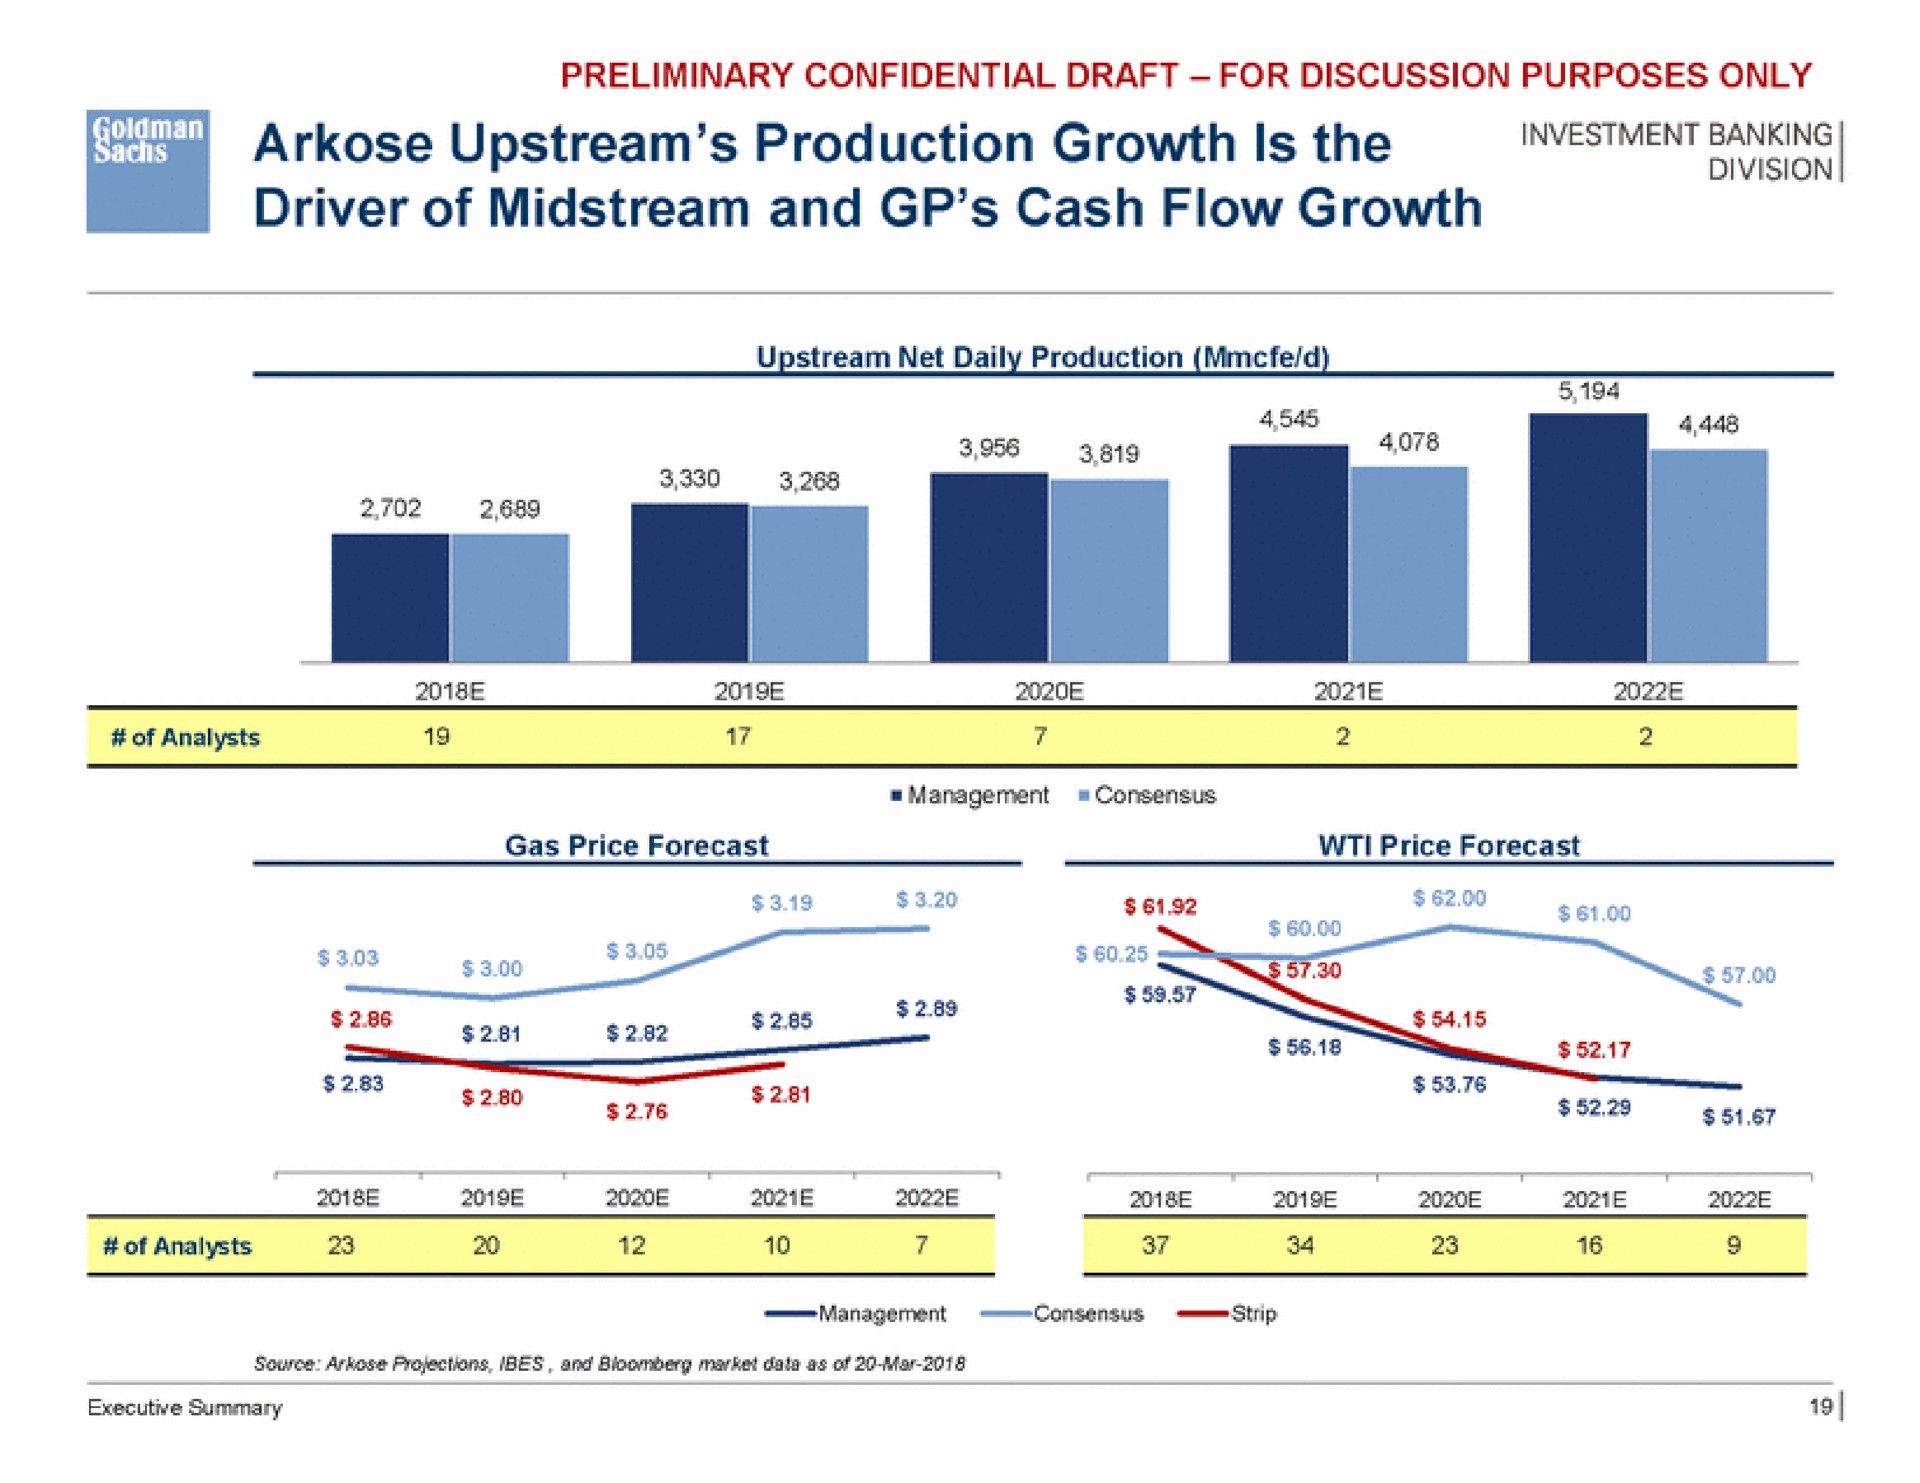 arkose upstream production growth is the driver of midstream and cash flow growth | Goldman Sachs